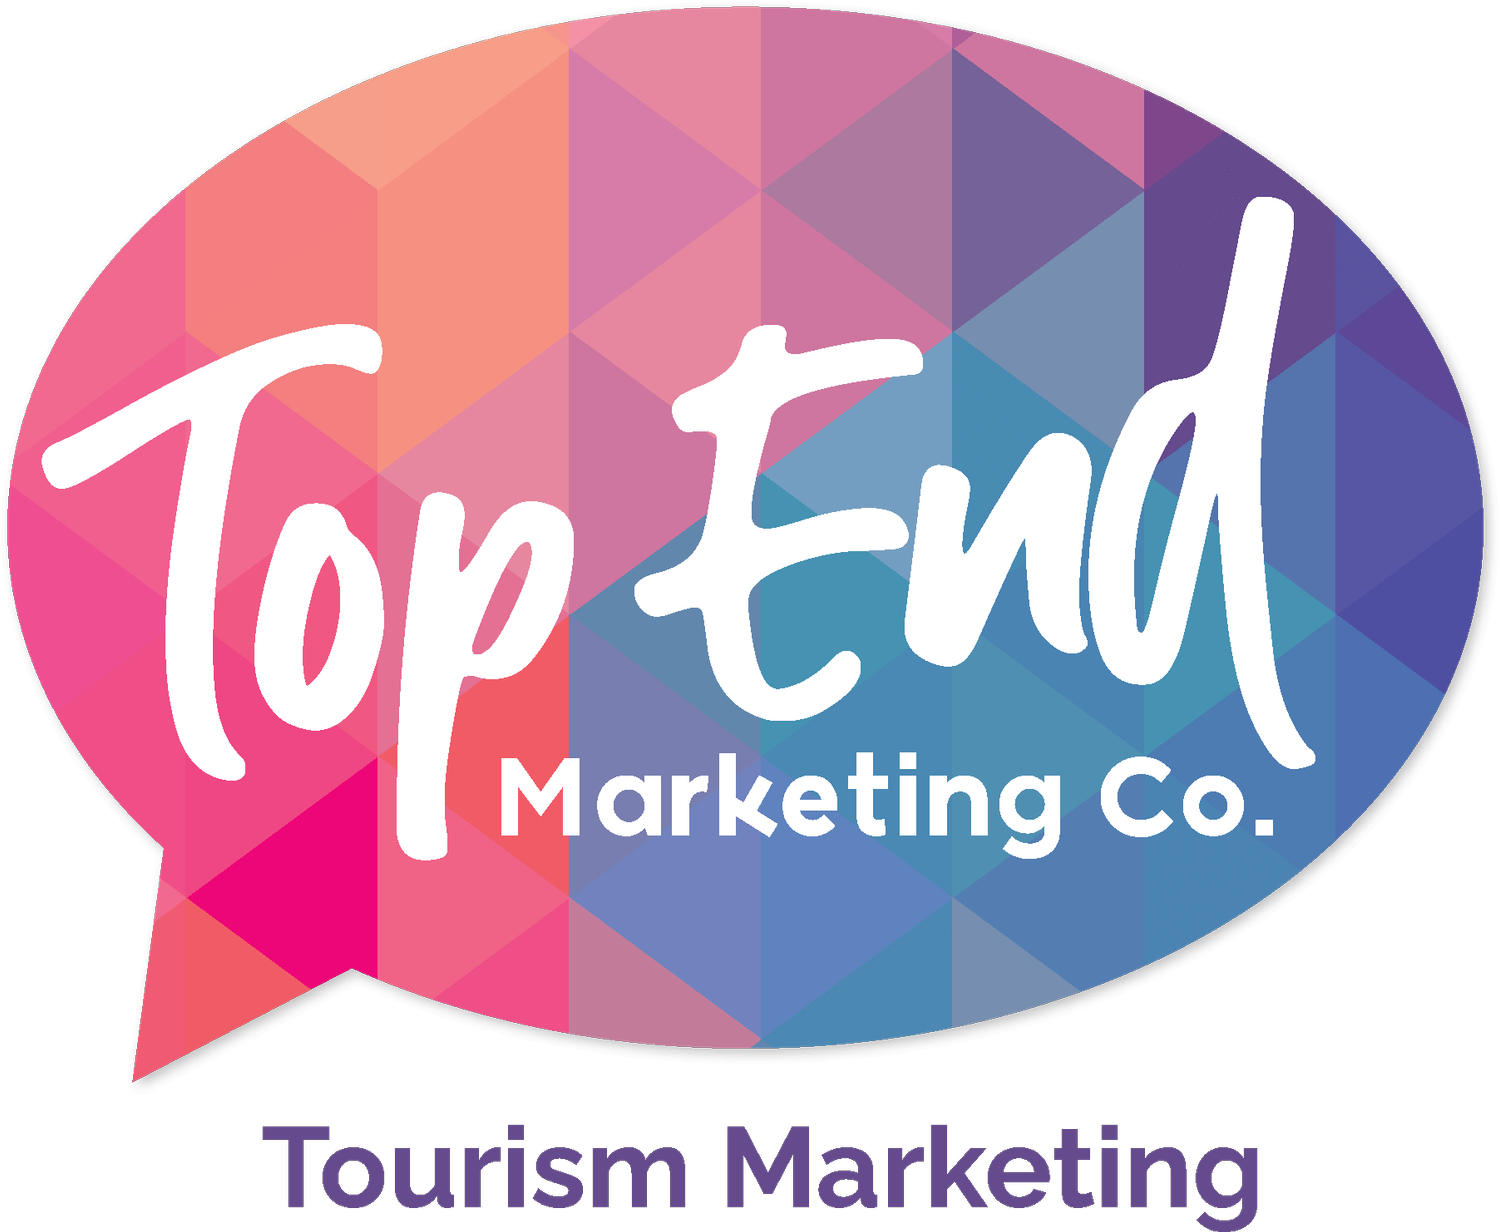 Top End Marketing Co